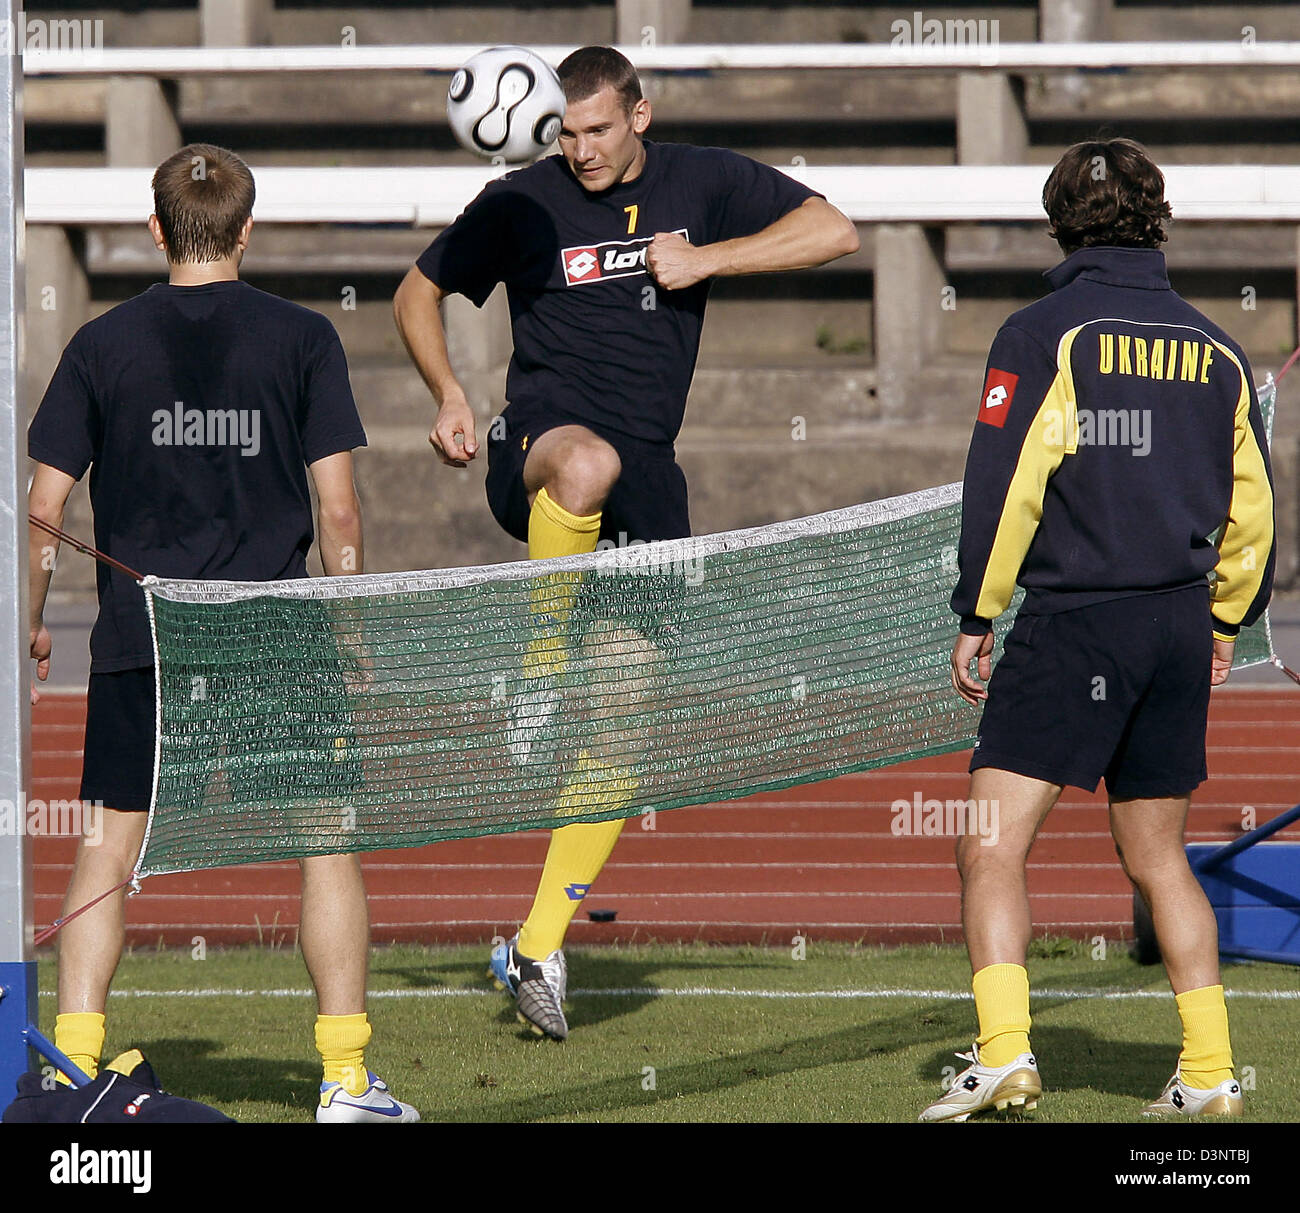 Ukraine national soccer star Andriy Shevchenko (C) plays soccer tennis with  two teammates during a training session in Potsdam, Germany, Wednesday, 28  June 2006. Ukraine faces Italy in the upcoming FIFA World